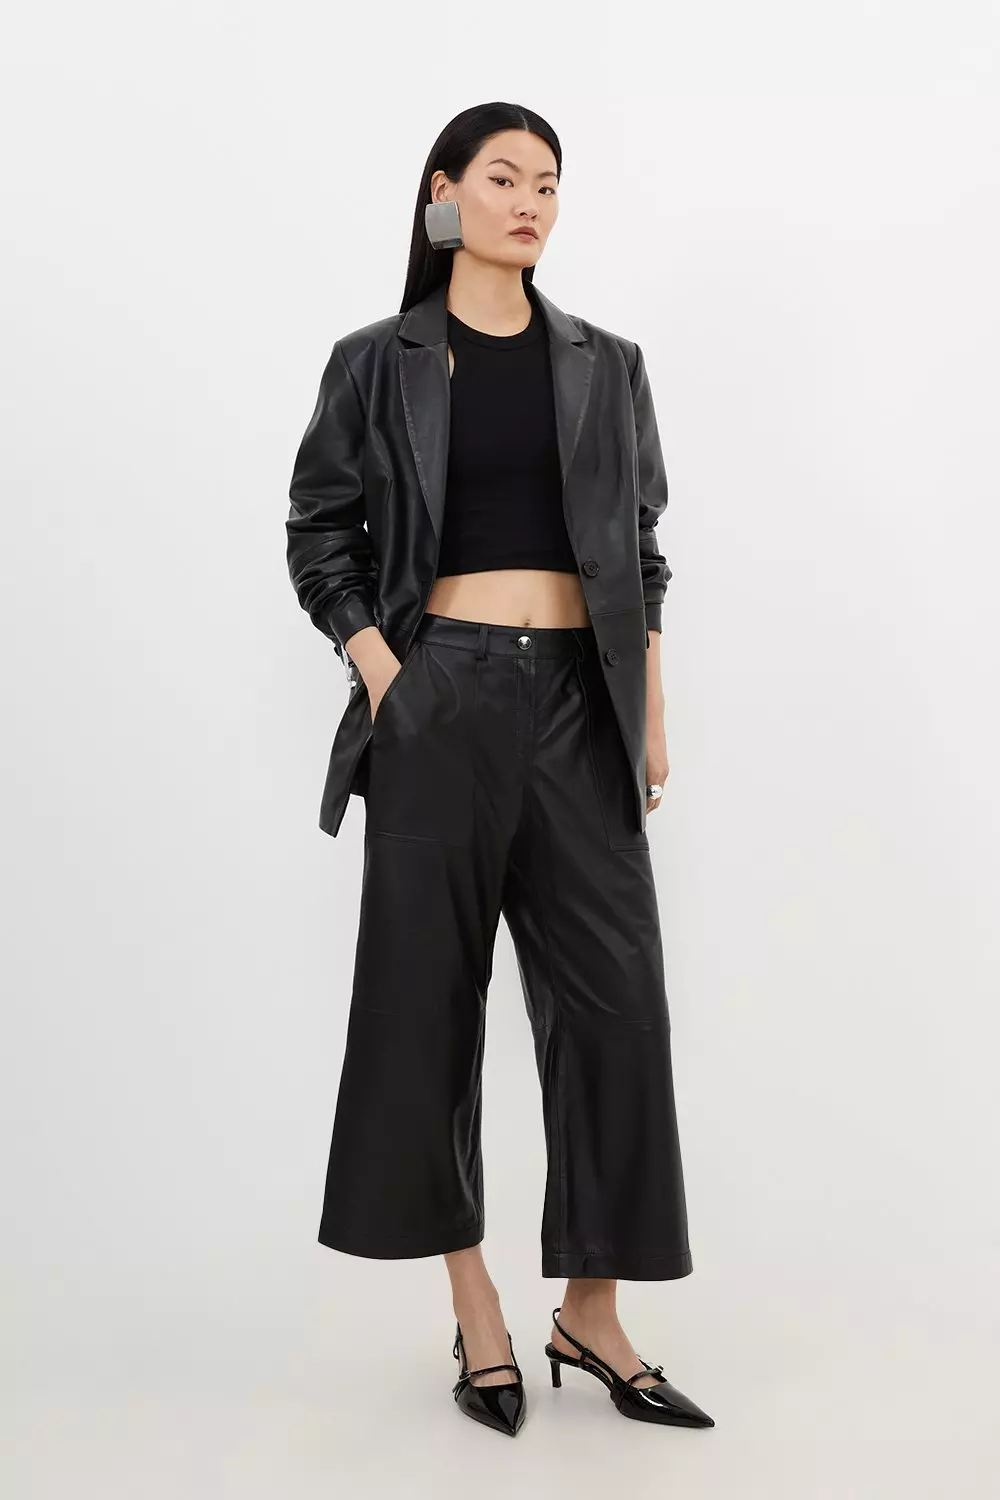 Black lace top + culotte pants date night outfit by extra petite